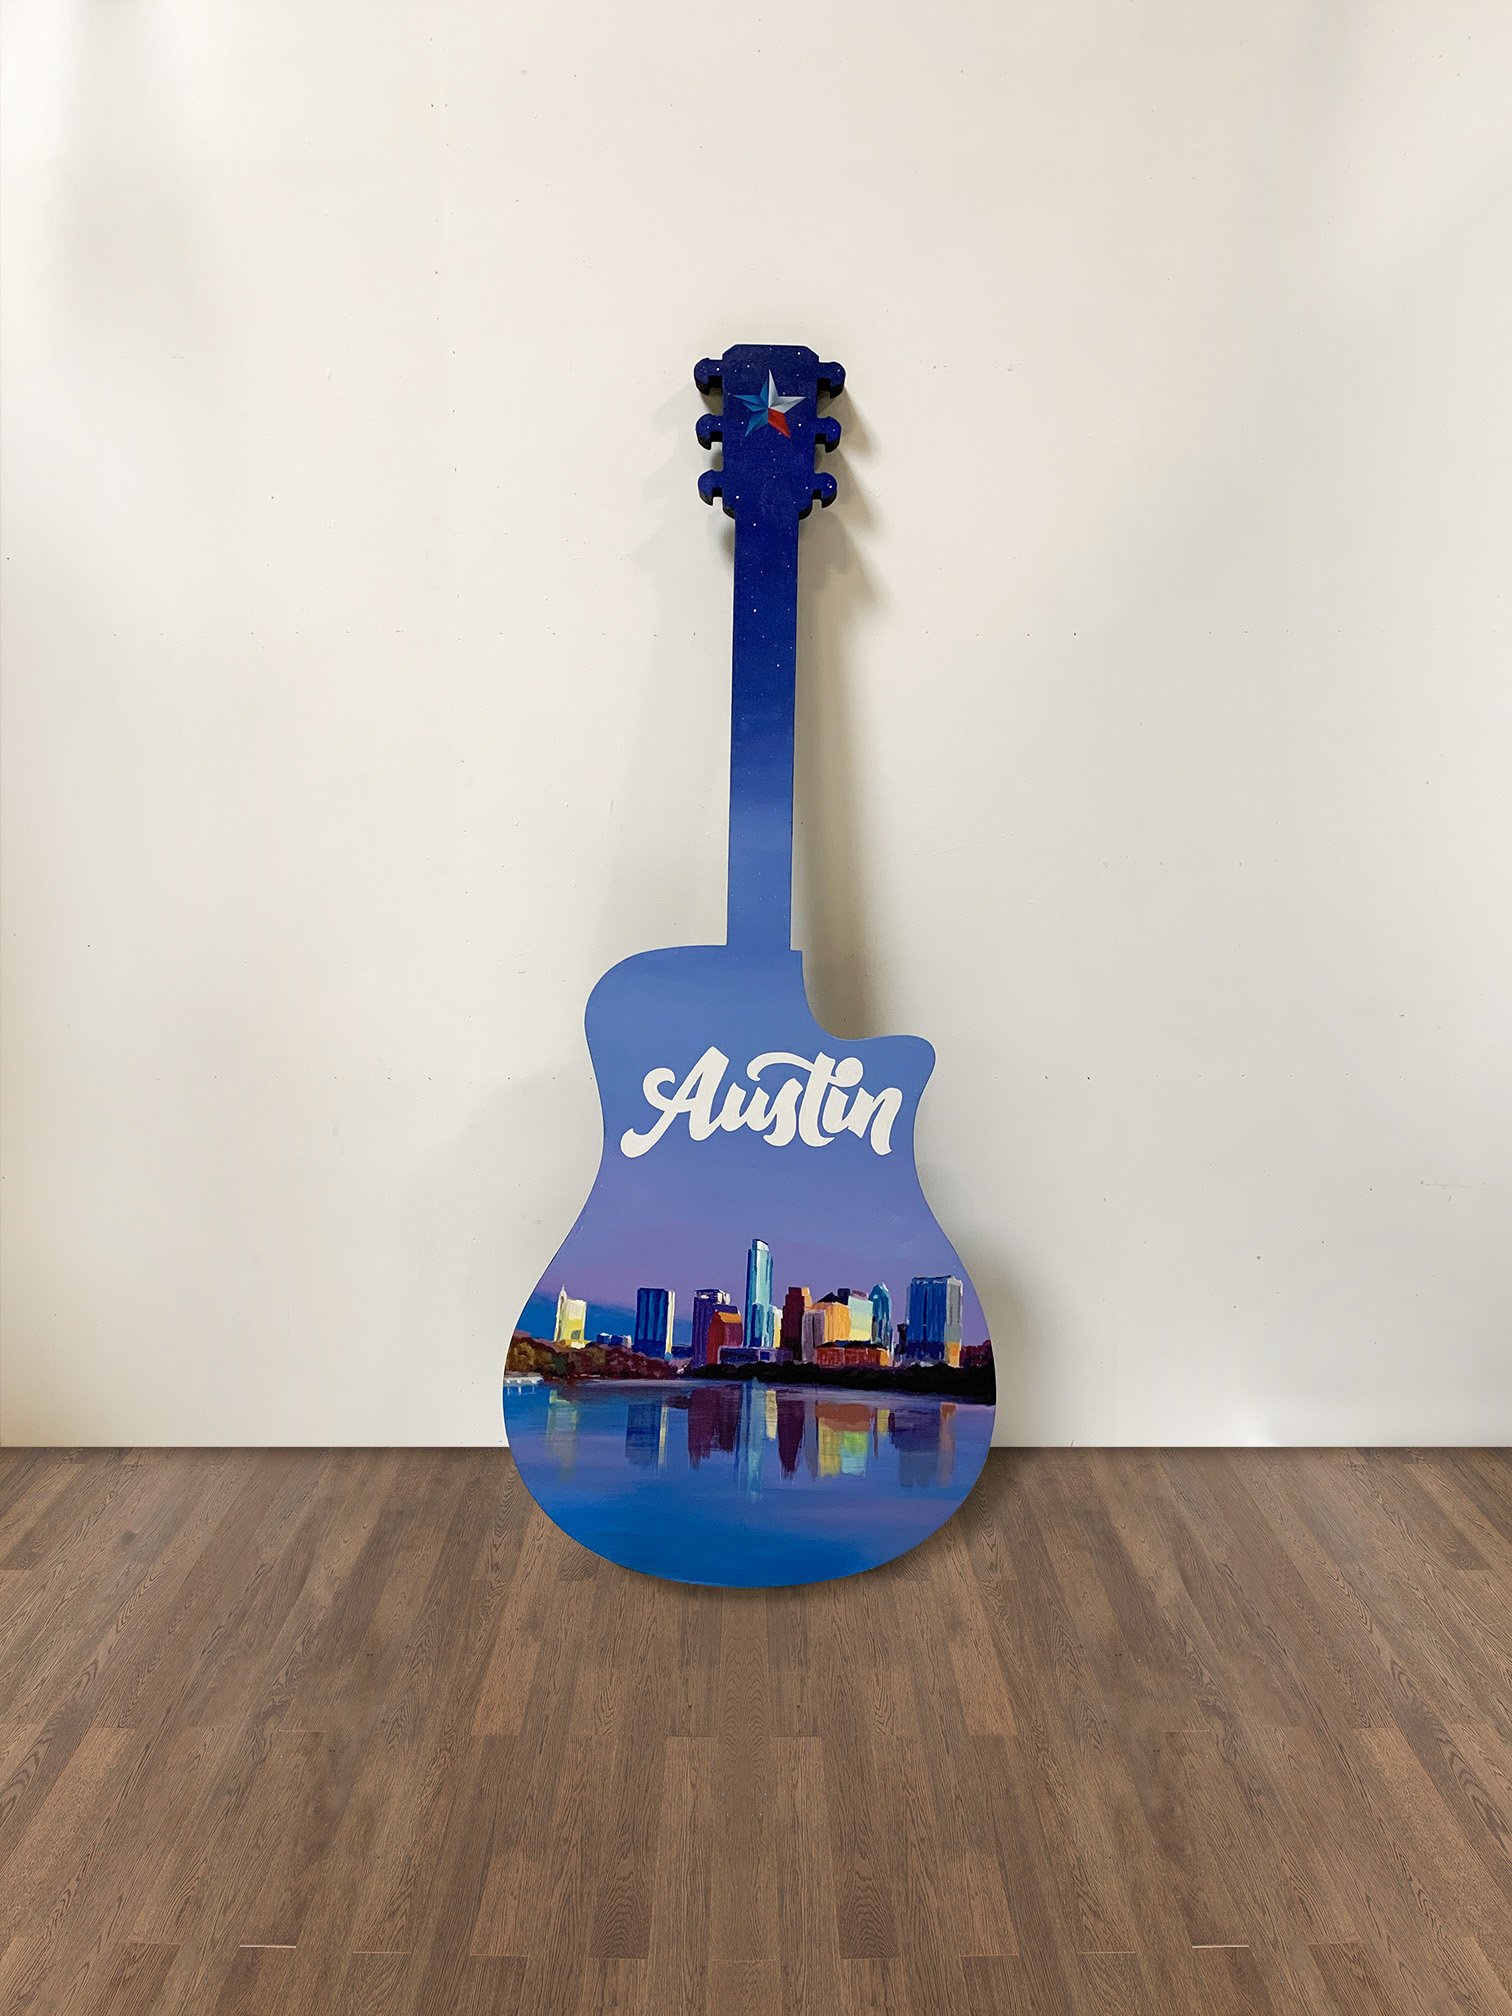 The Greetings to Austin Guitar